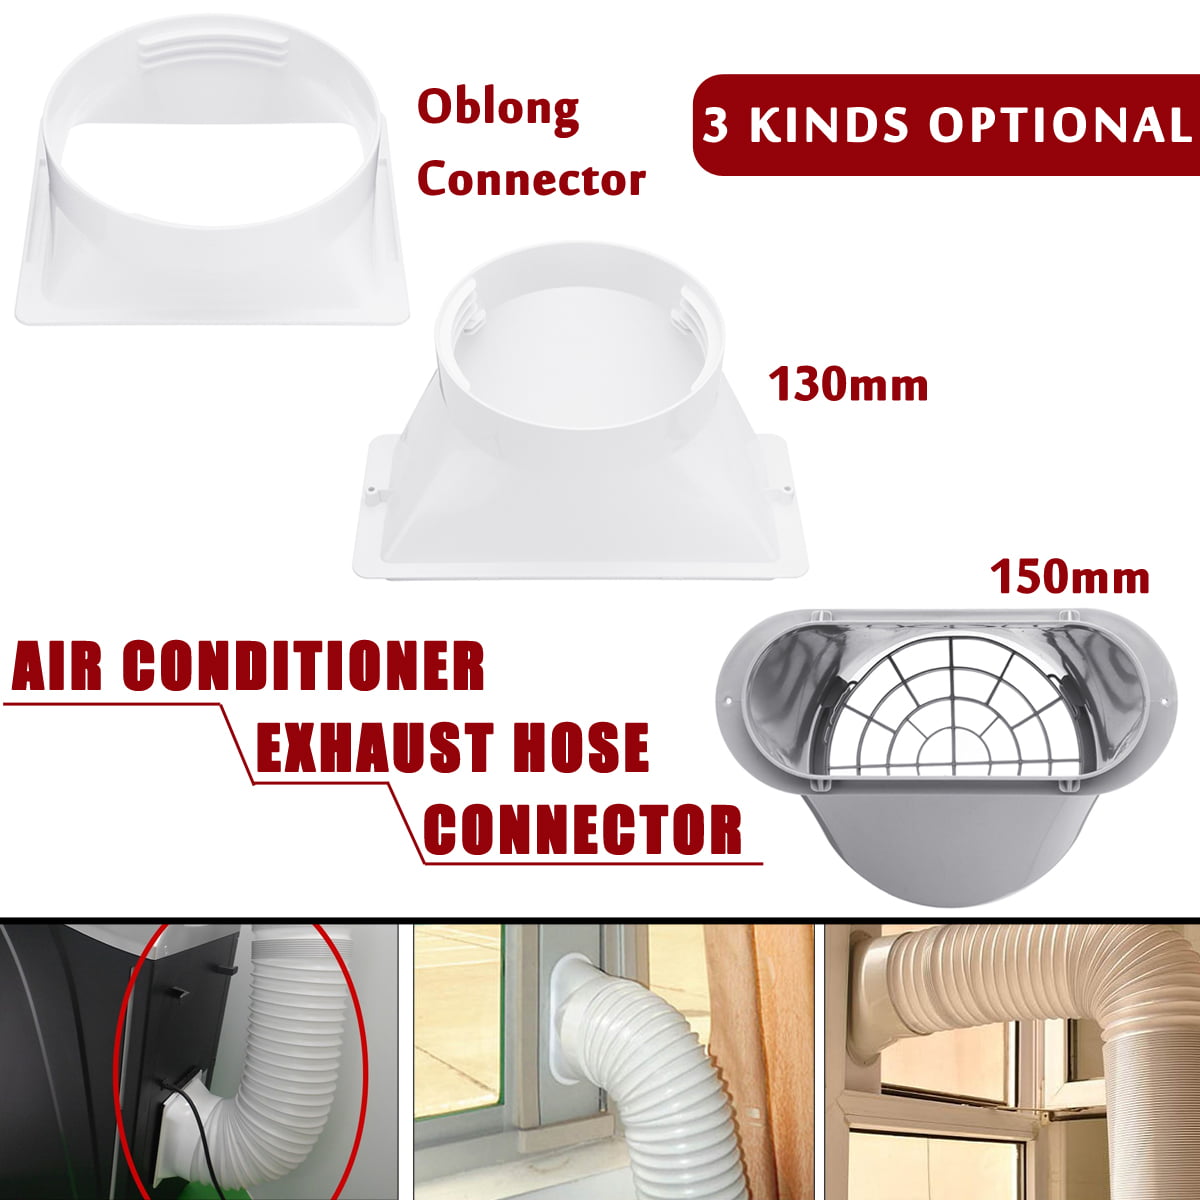 Exhaust Hose Window Adaptor For Portable Air Conditioner Tube Flat Connector T1 